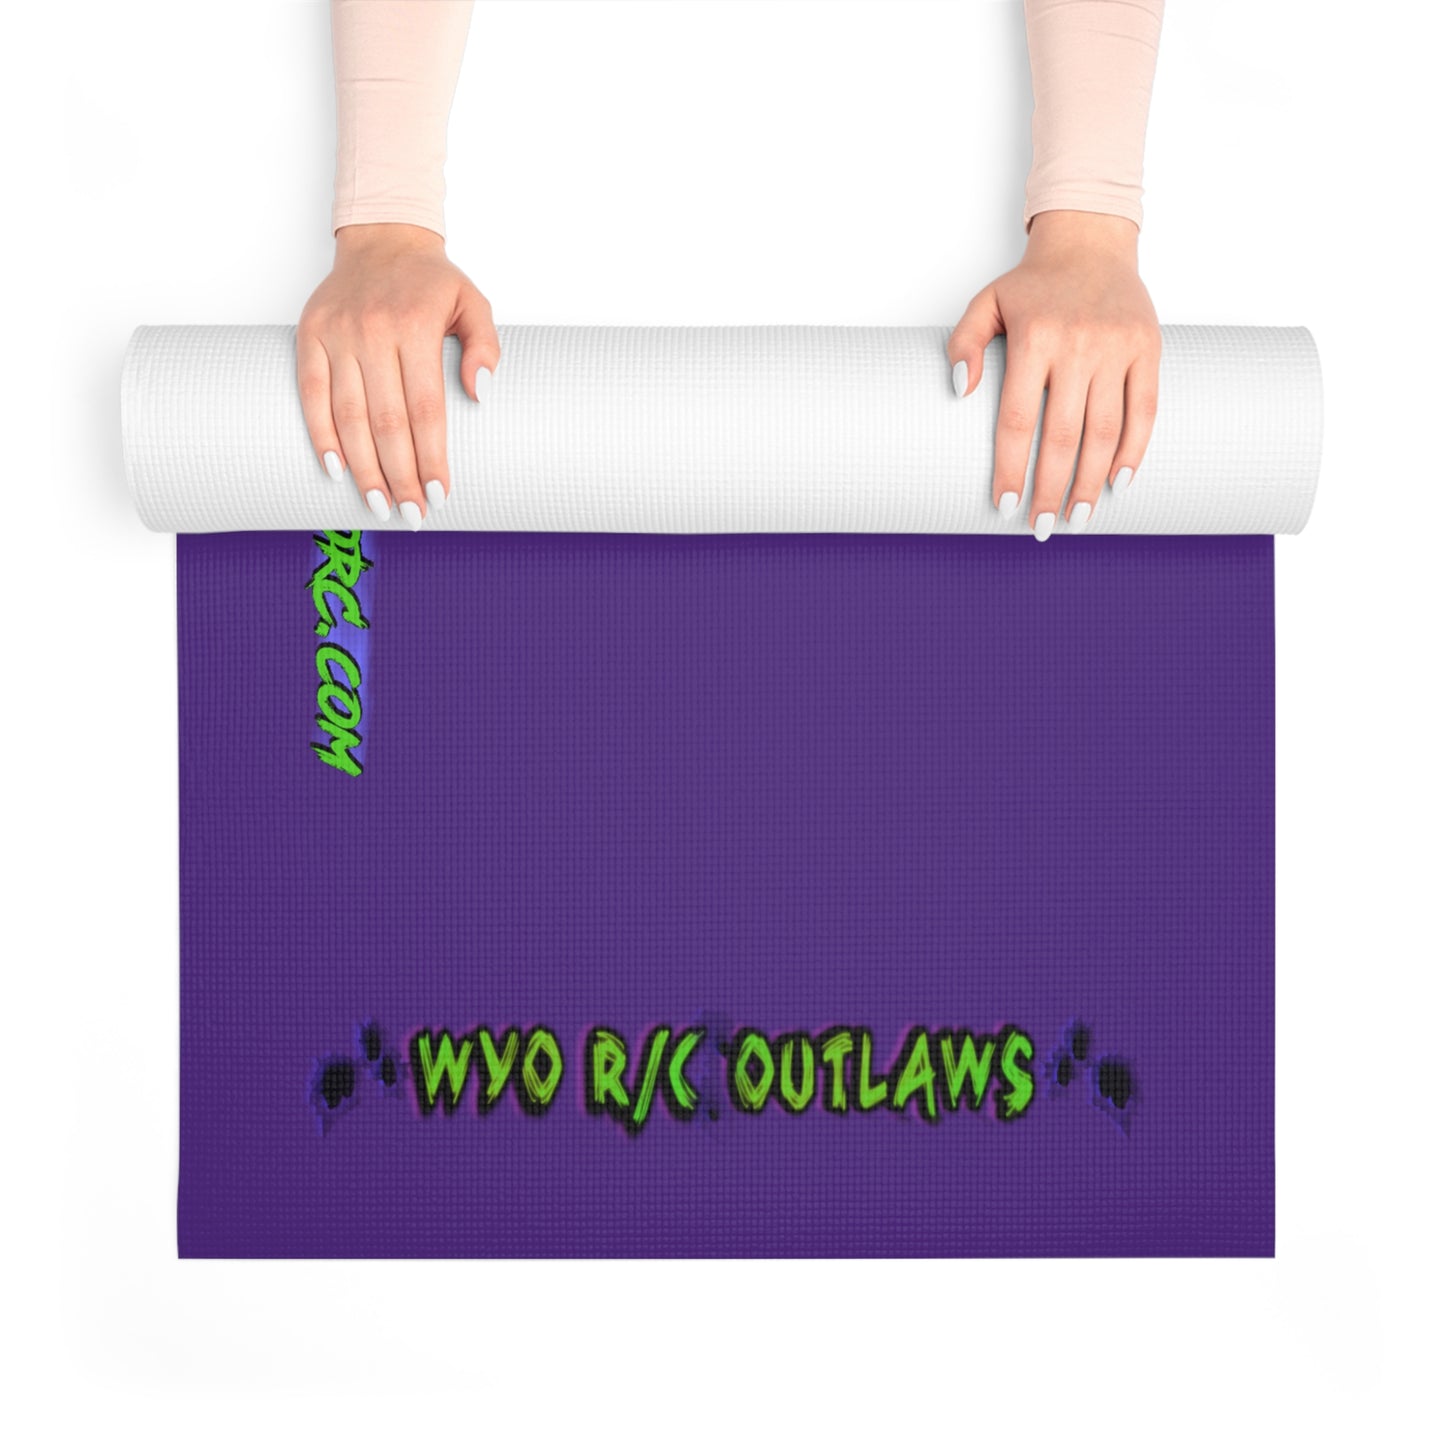 WYO RC OUTLAWS  Foam Pit Mat BY DinoRC